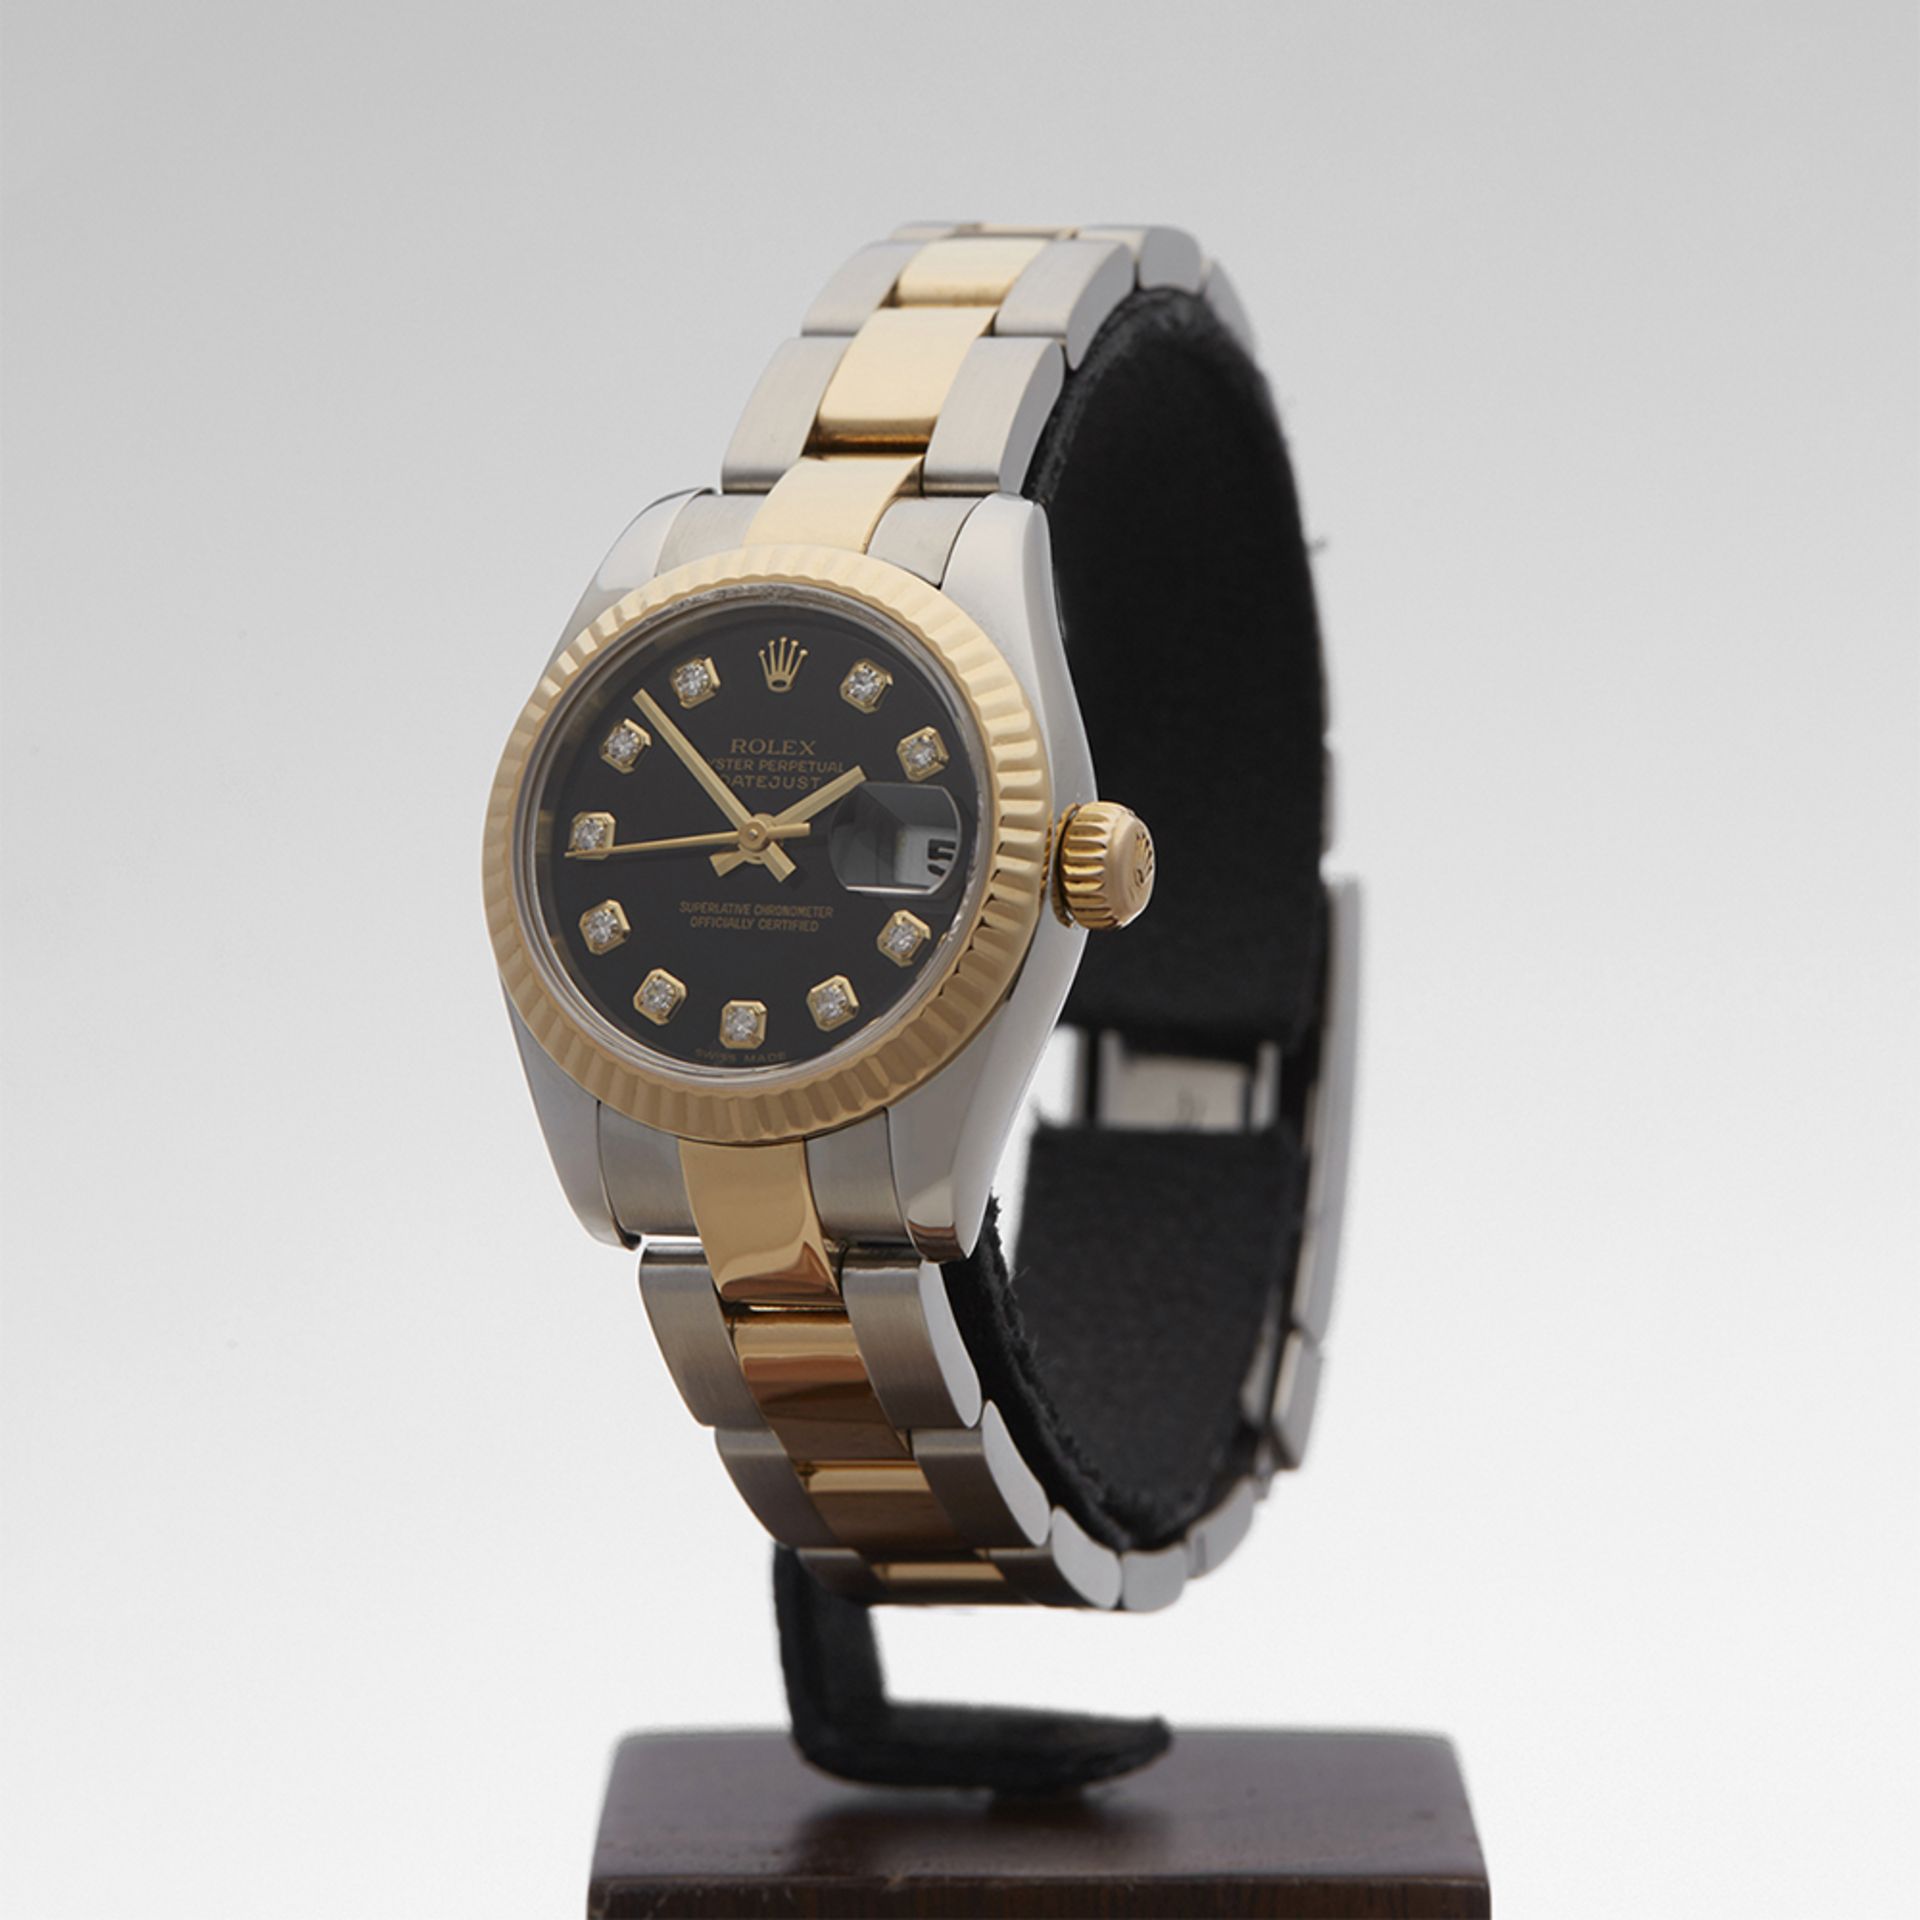 Rolex, Datejust 26mm Stainless Steel & 18k Yellow Gold 179173 - Image 3 of 9